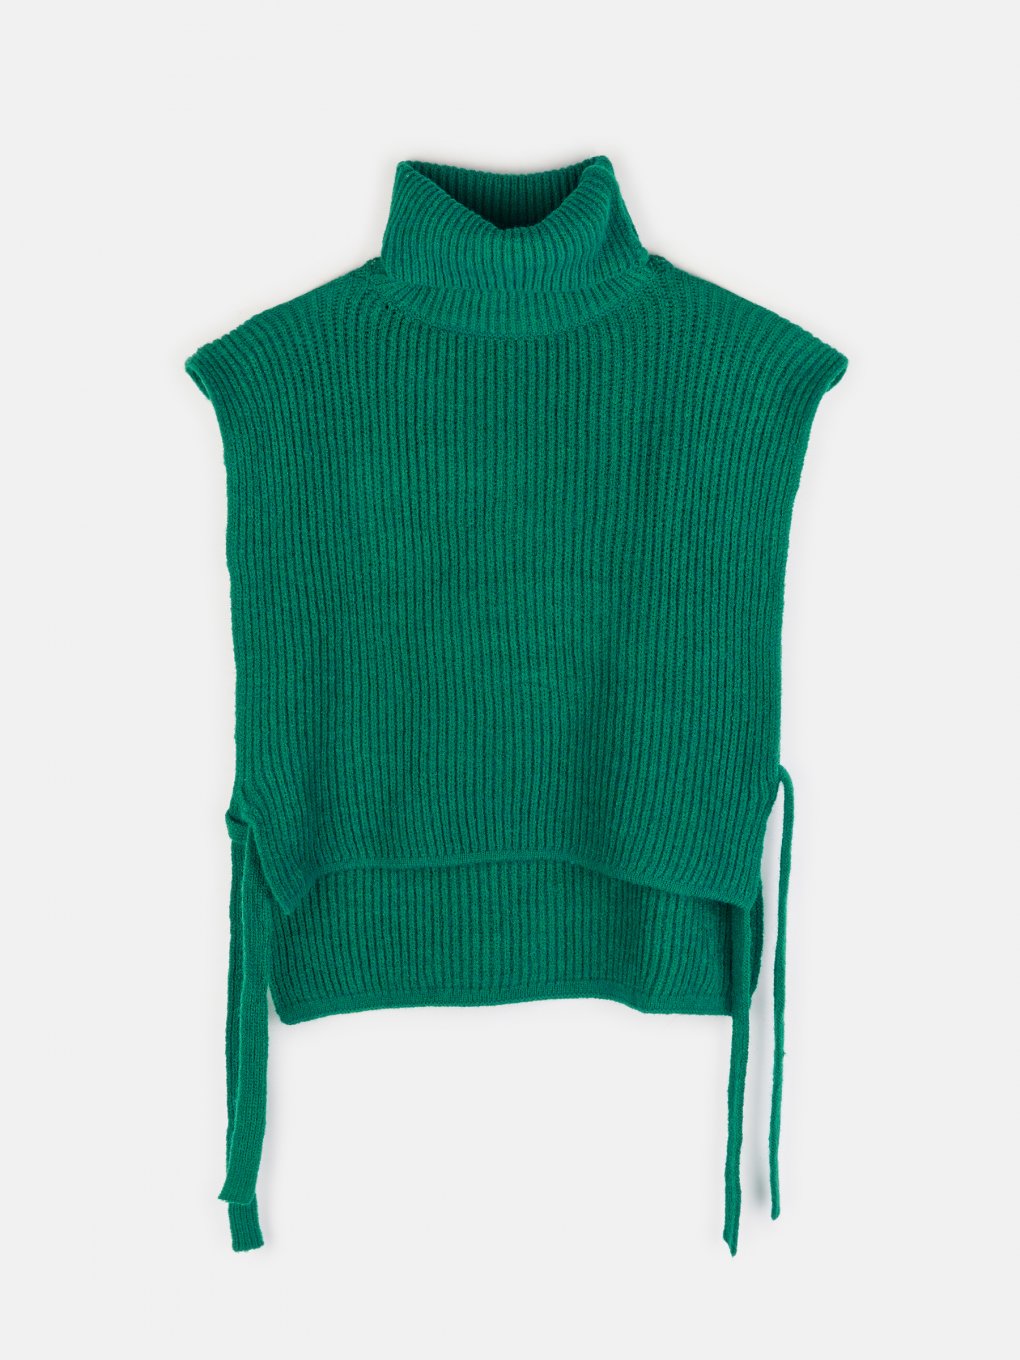 Roll neck vest with side lacing